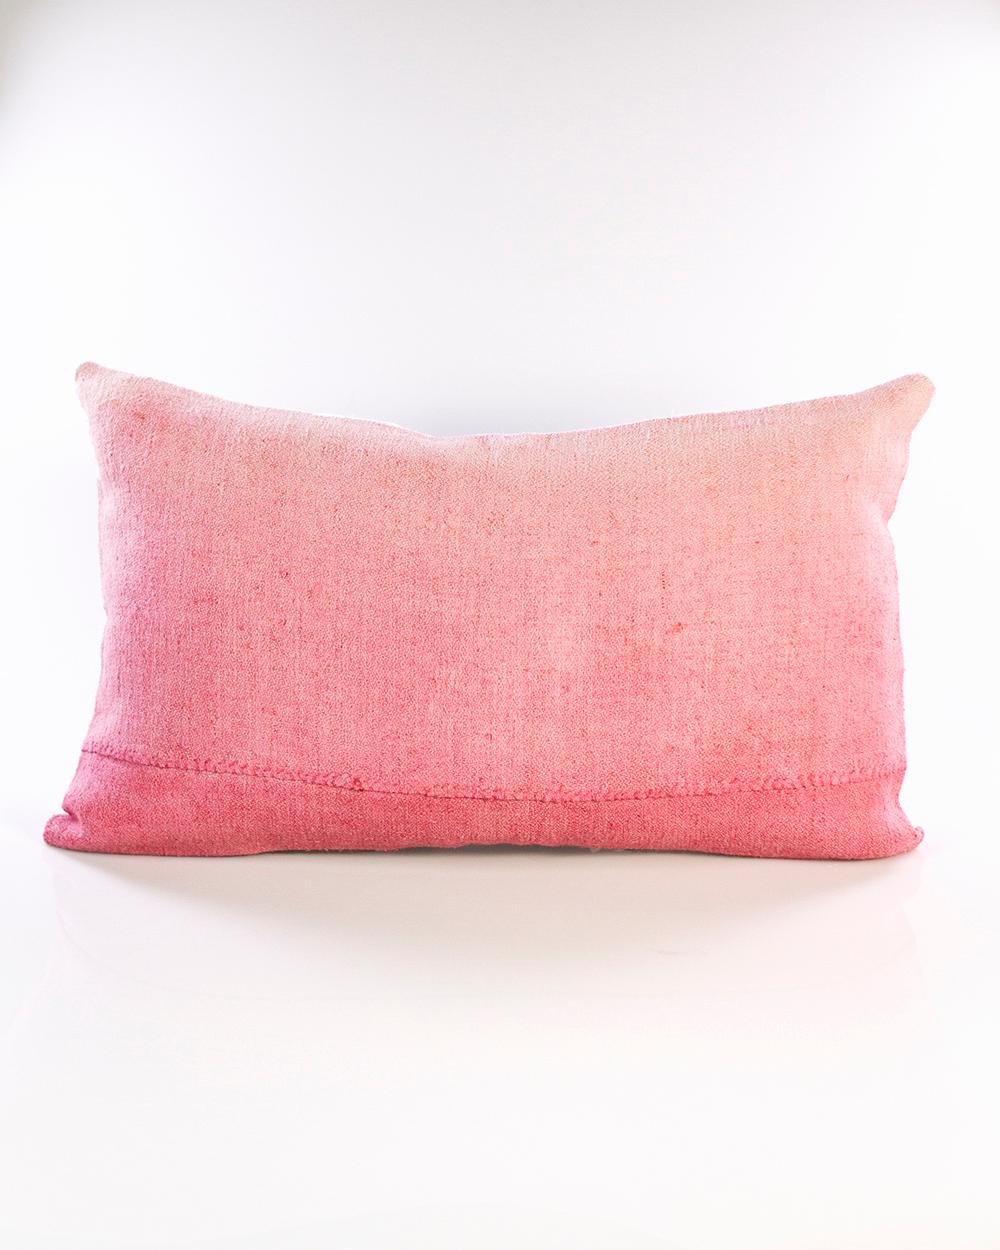 Hand-Crafted Espanyolet Pink Ombre Hand-Painted Vintage Linen Pillow 12